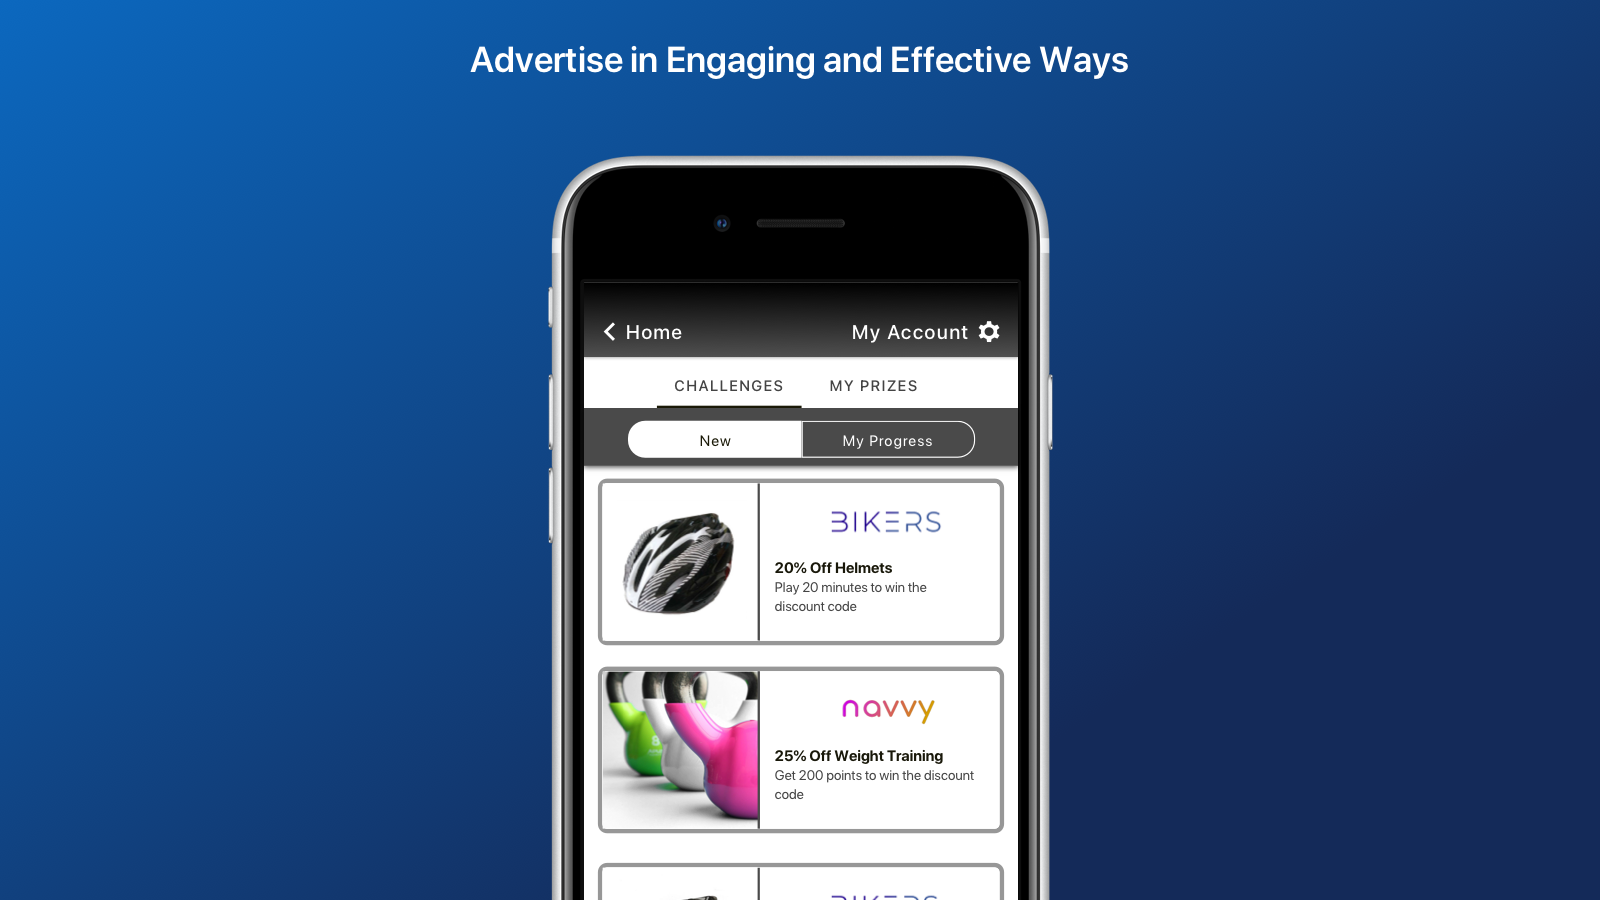 Advertise in Engaging and Effective Ways